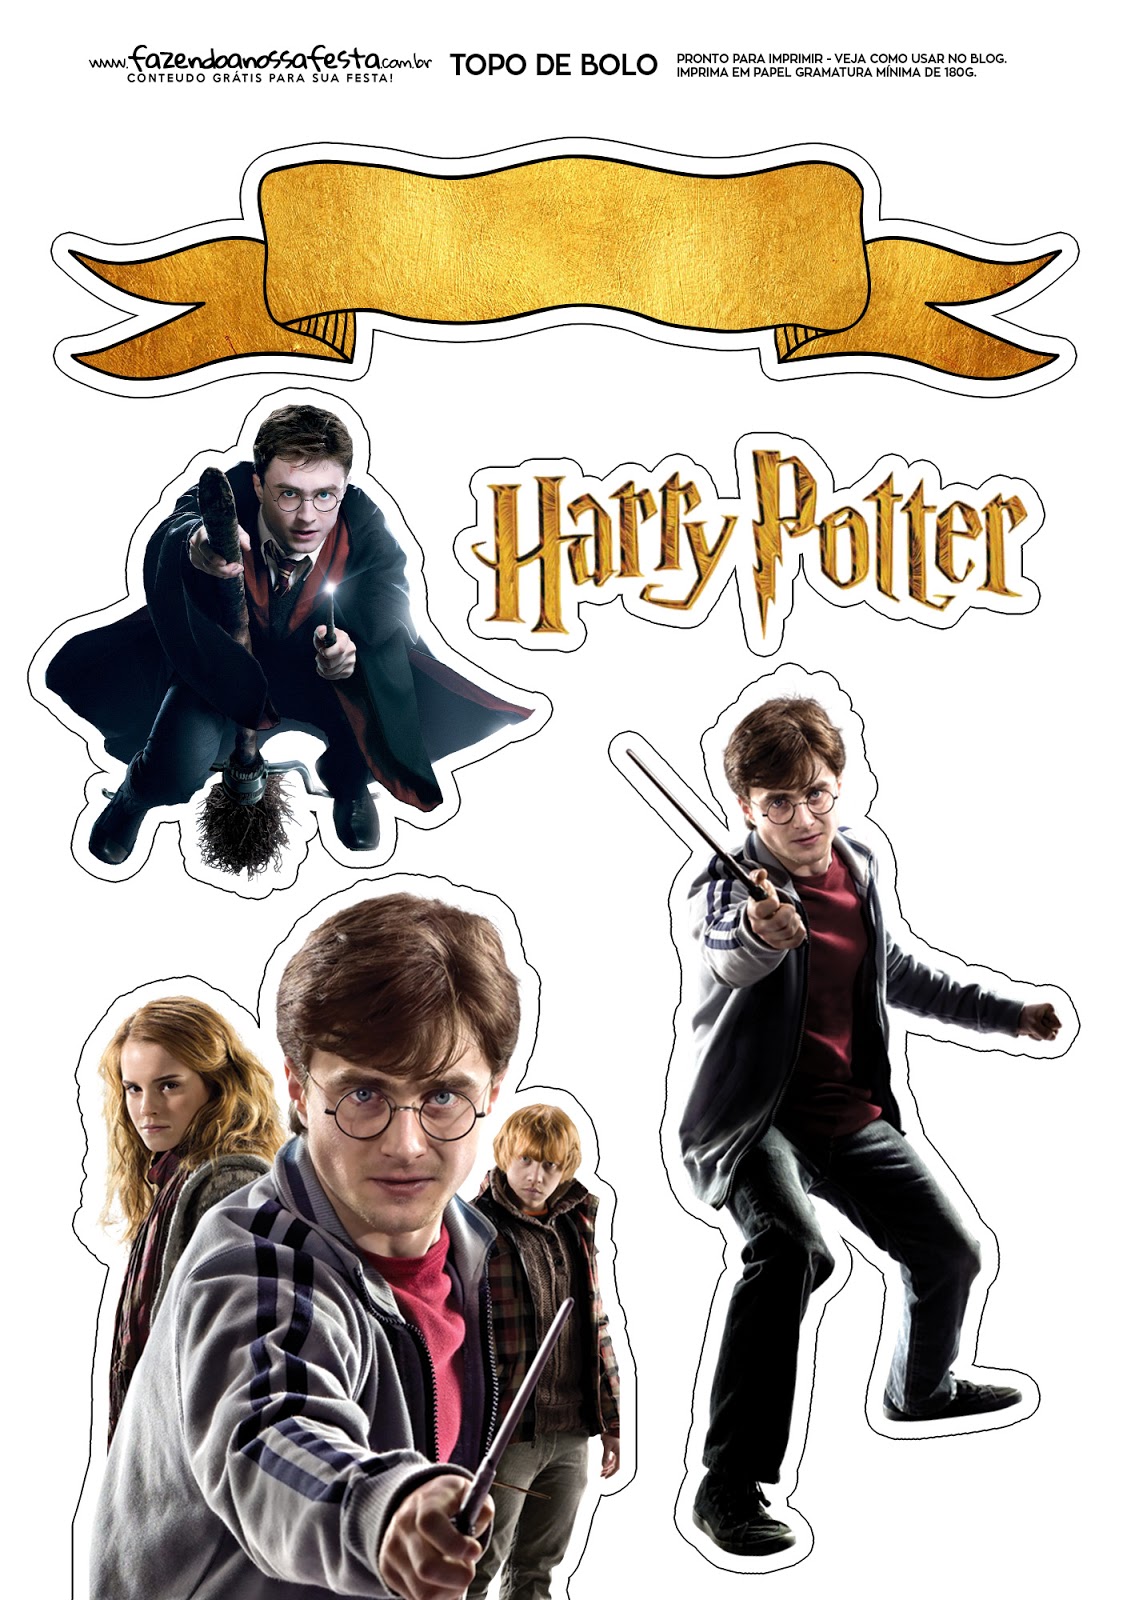 Harry Potter Free Printable Cake Toppers. Oh My Fiesta! for Geeks